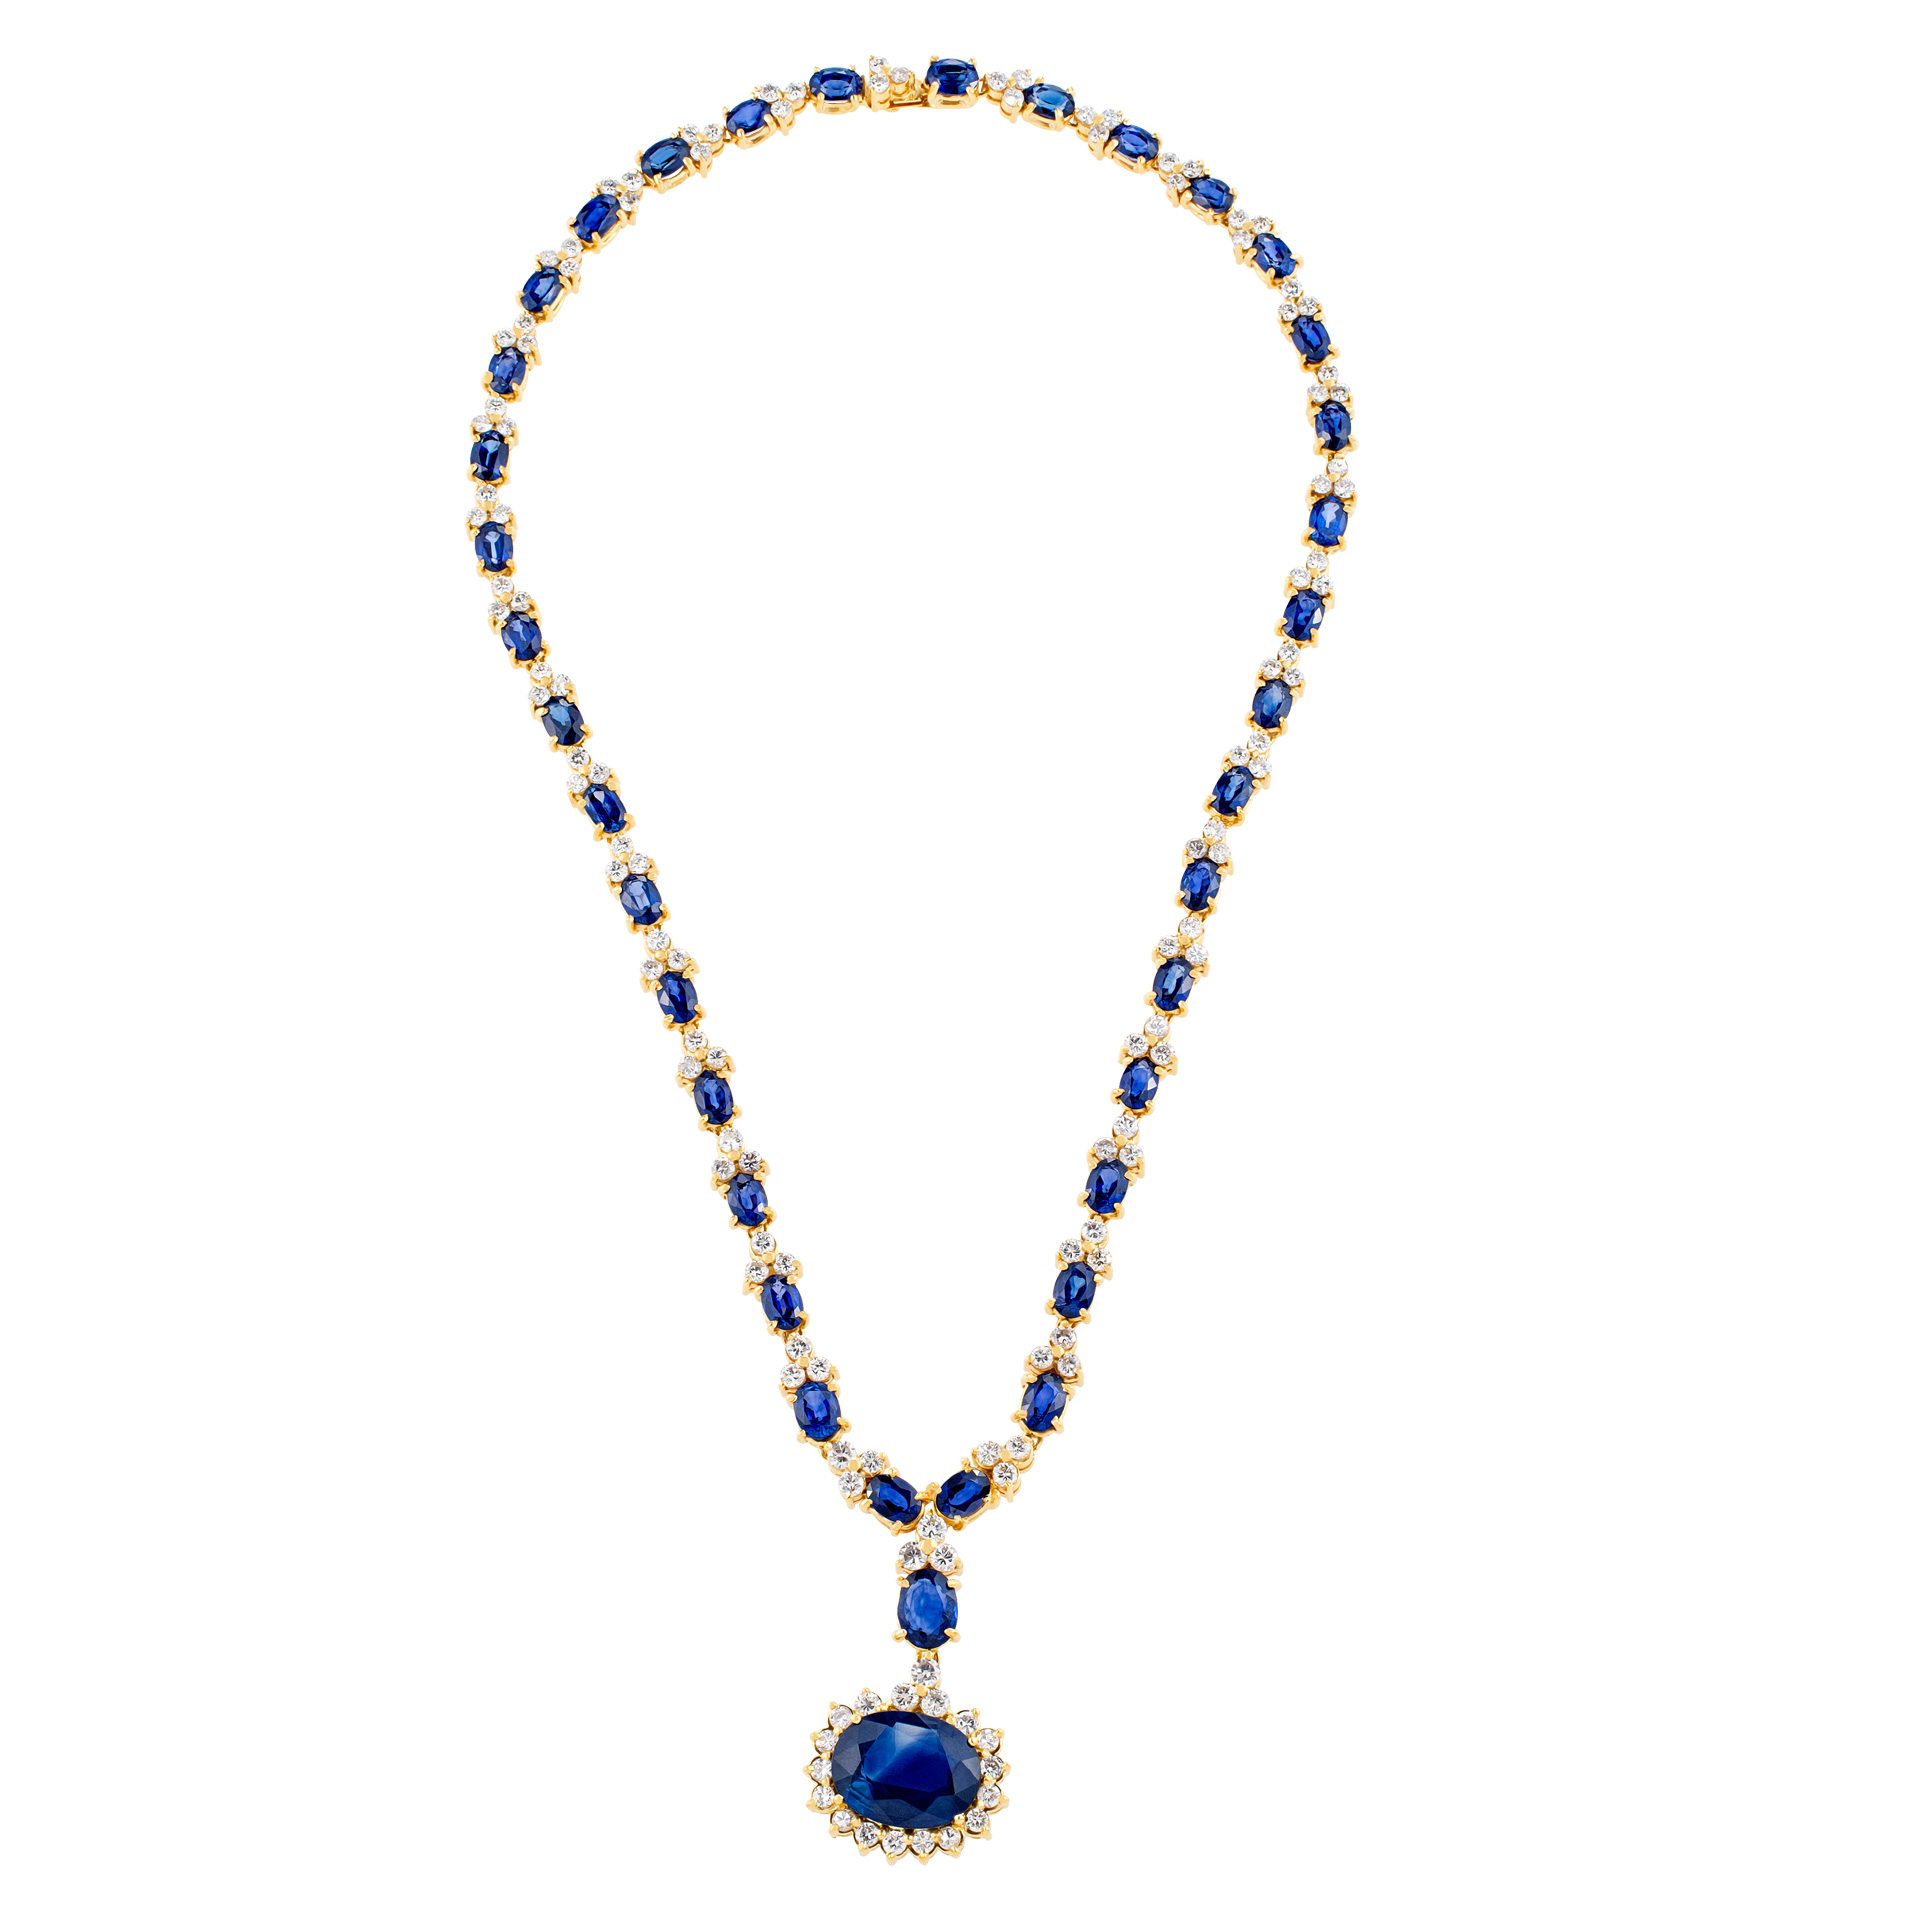 Sapphire & diamond necklace in 18k yellow gold